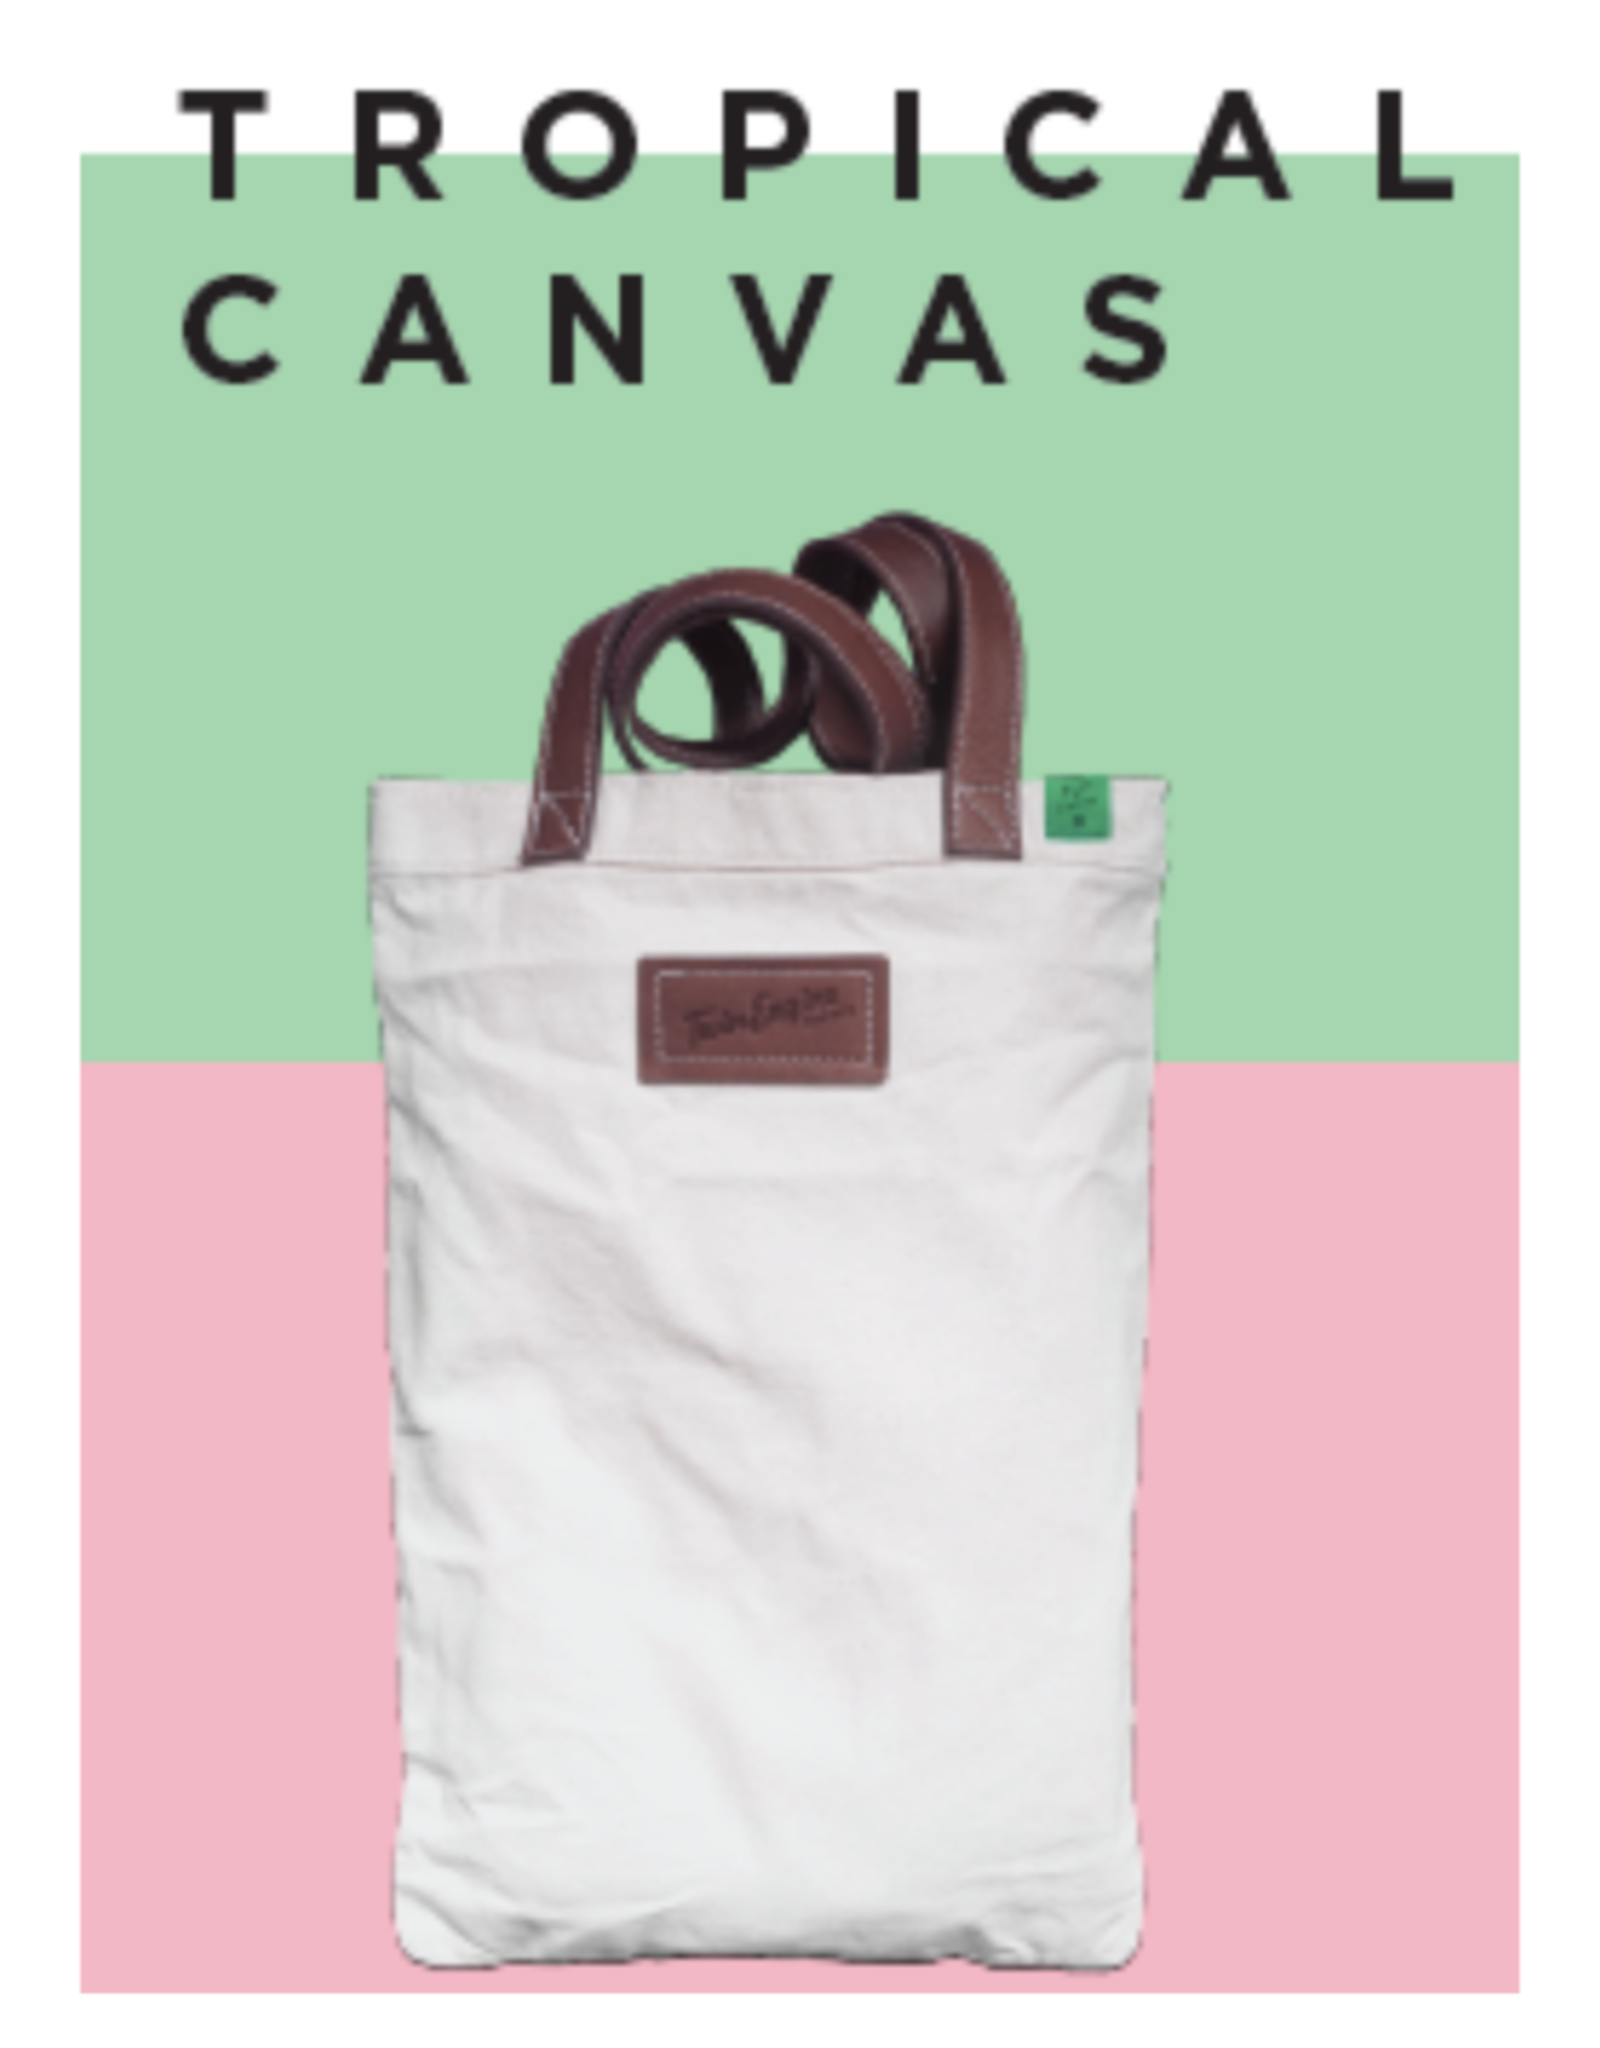 Twin Engine Tropical Canvas Tote